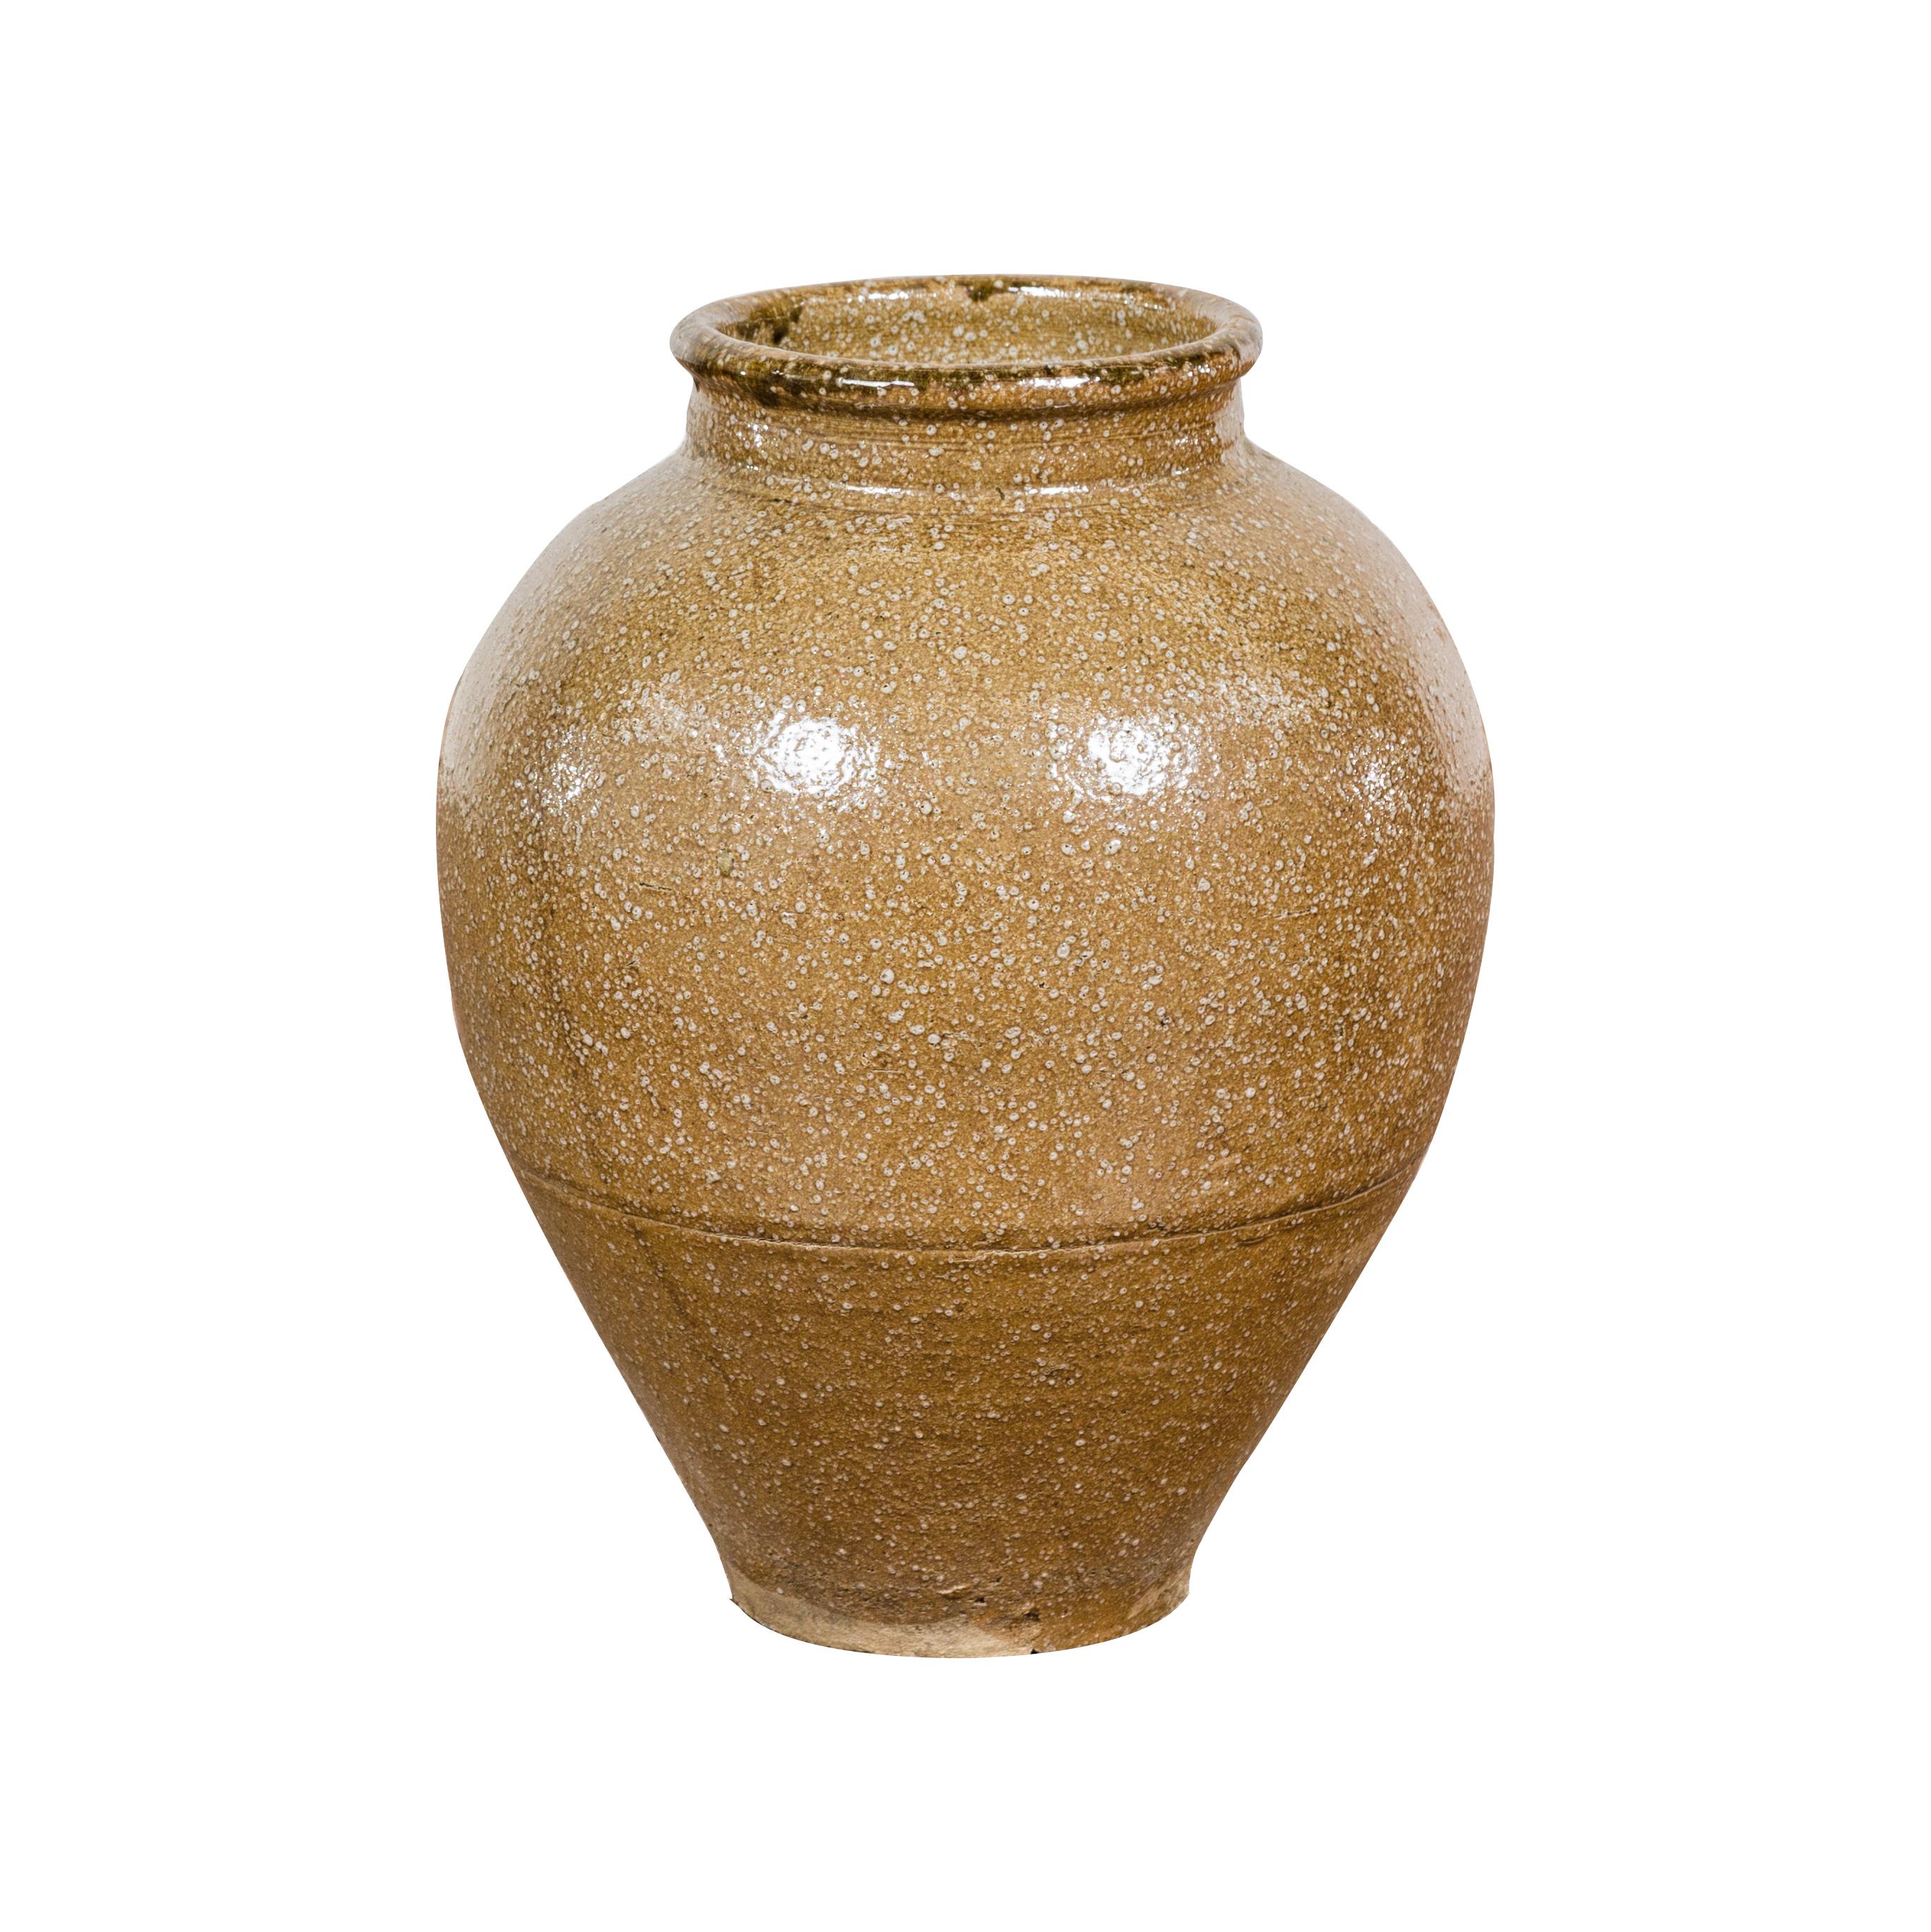 Japanese Taishō Period Two-Tone Sand Glaze Vase with Textured Finish, circa 1900 For Sale 10